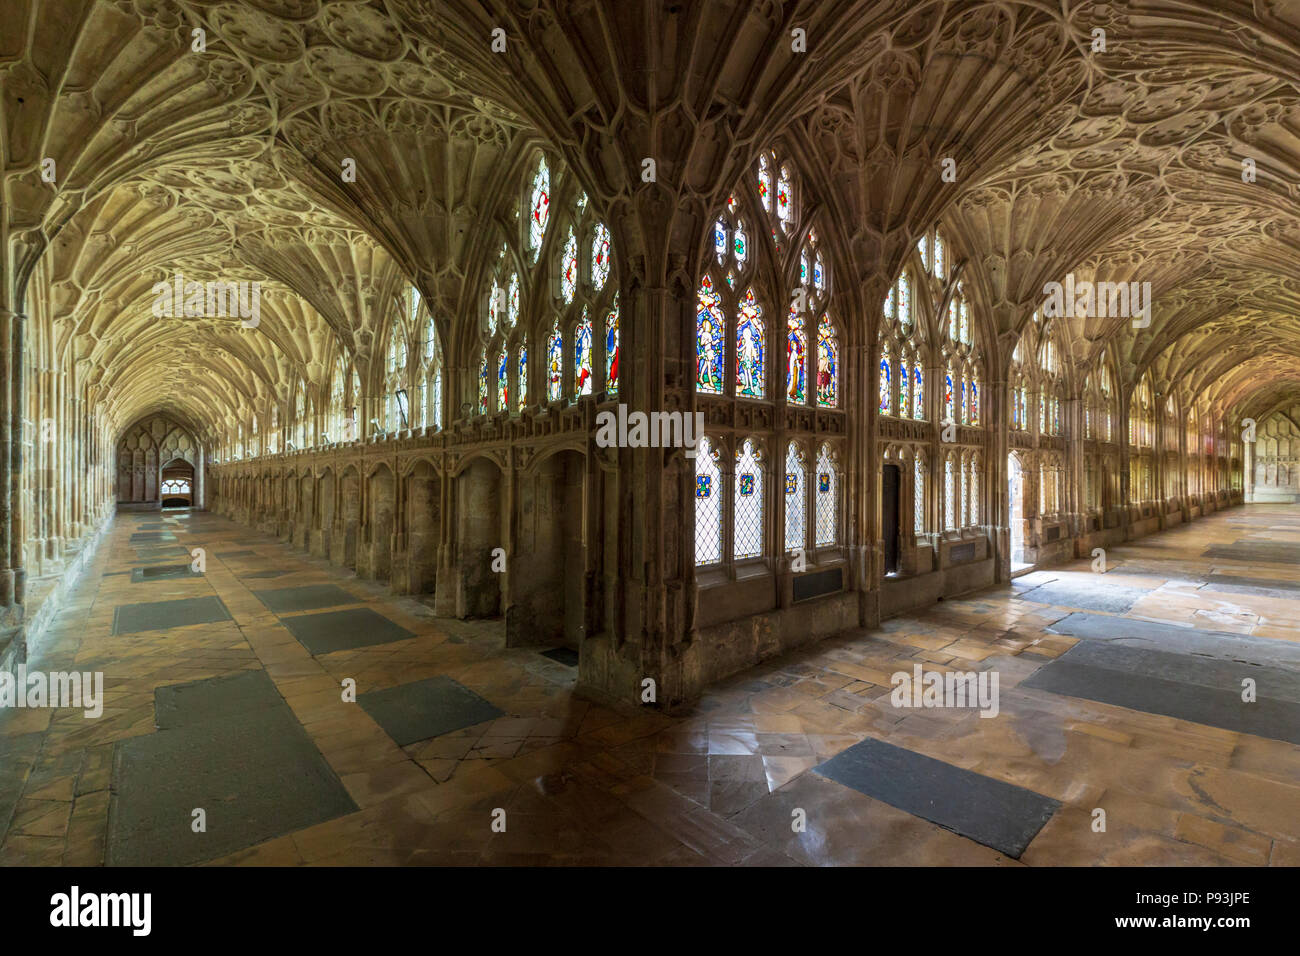 The vaulted ceiling and corridors of the Cloisters at Gloucester Cathedral, Gloucester, England Stock Photo